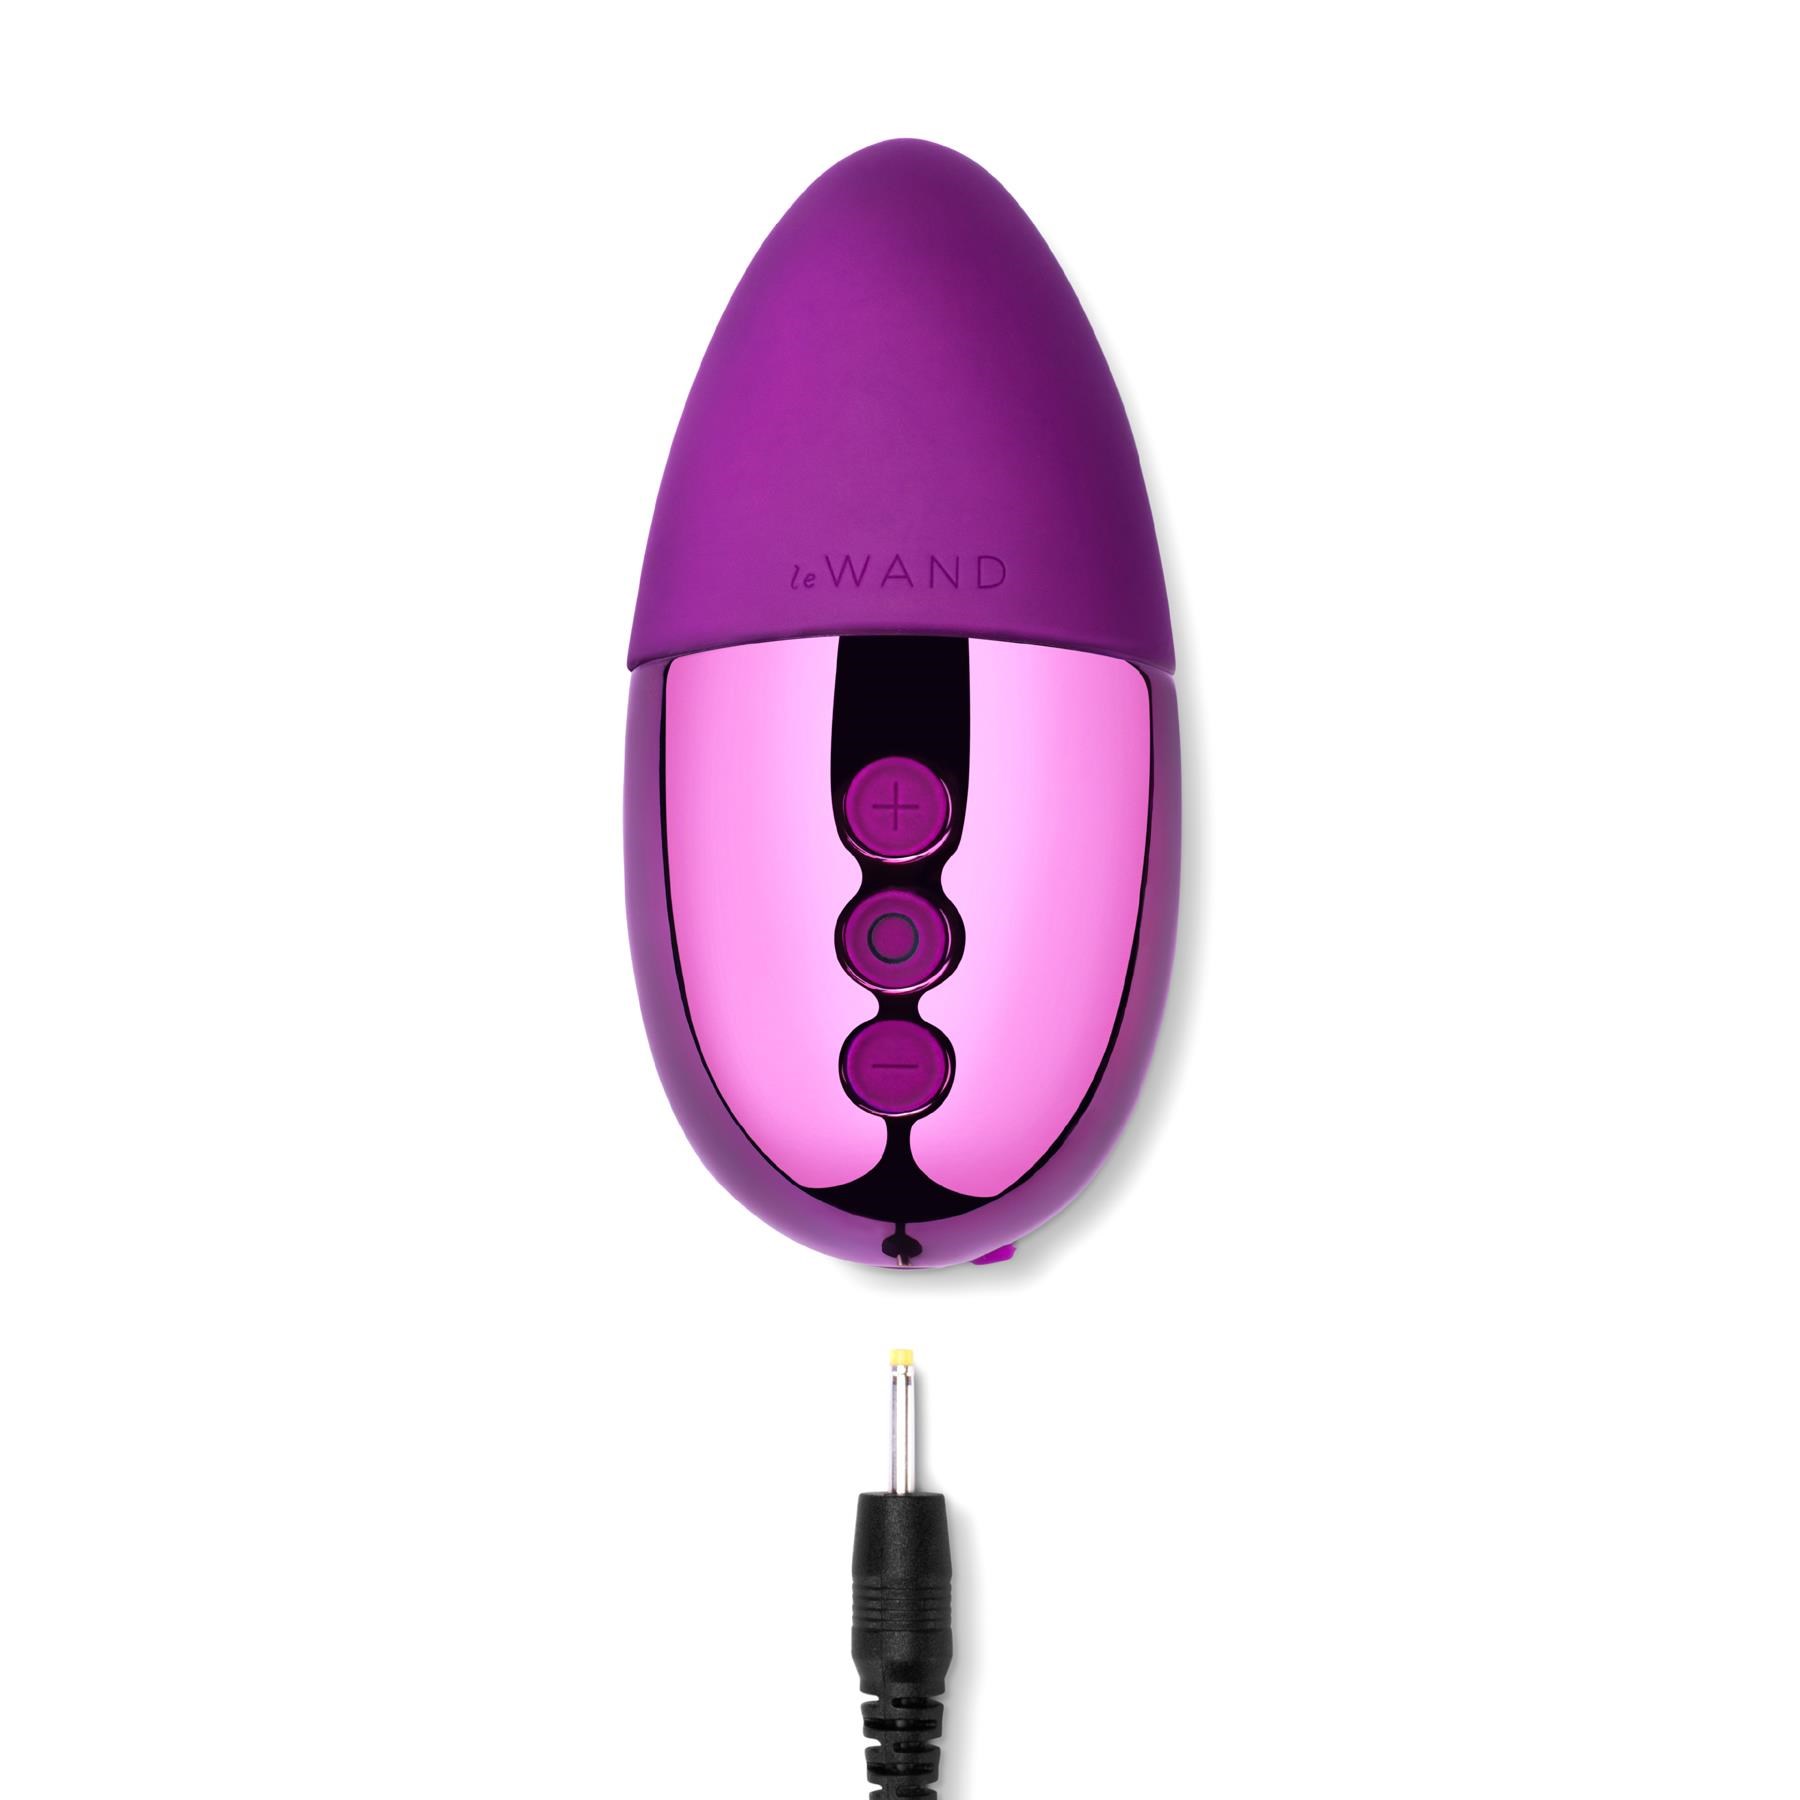 Le Wand Chrome Point Layon Vibrator- Showing Where Charging Cable is Placed